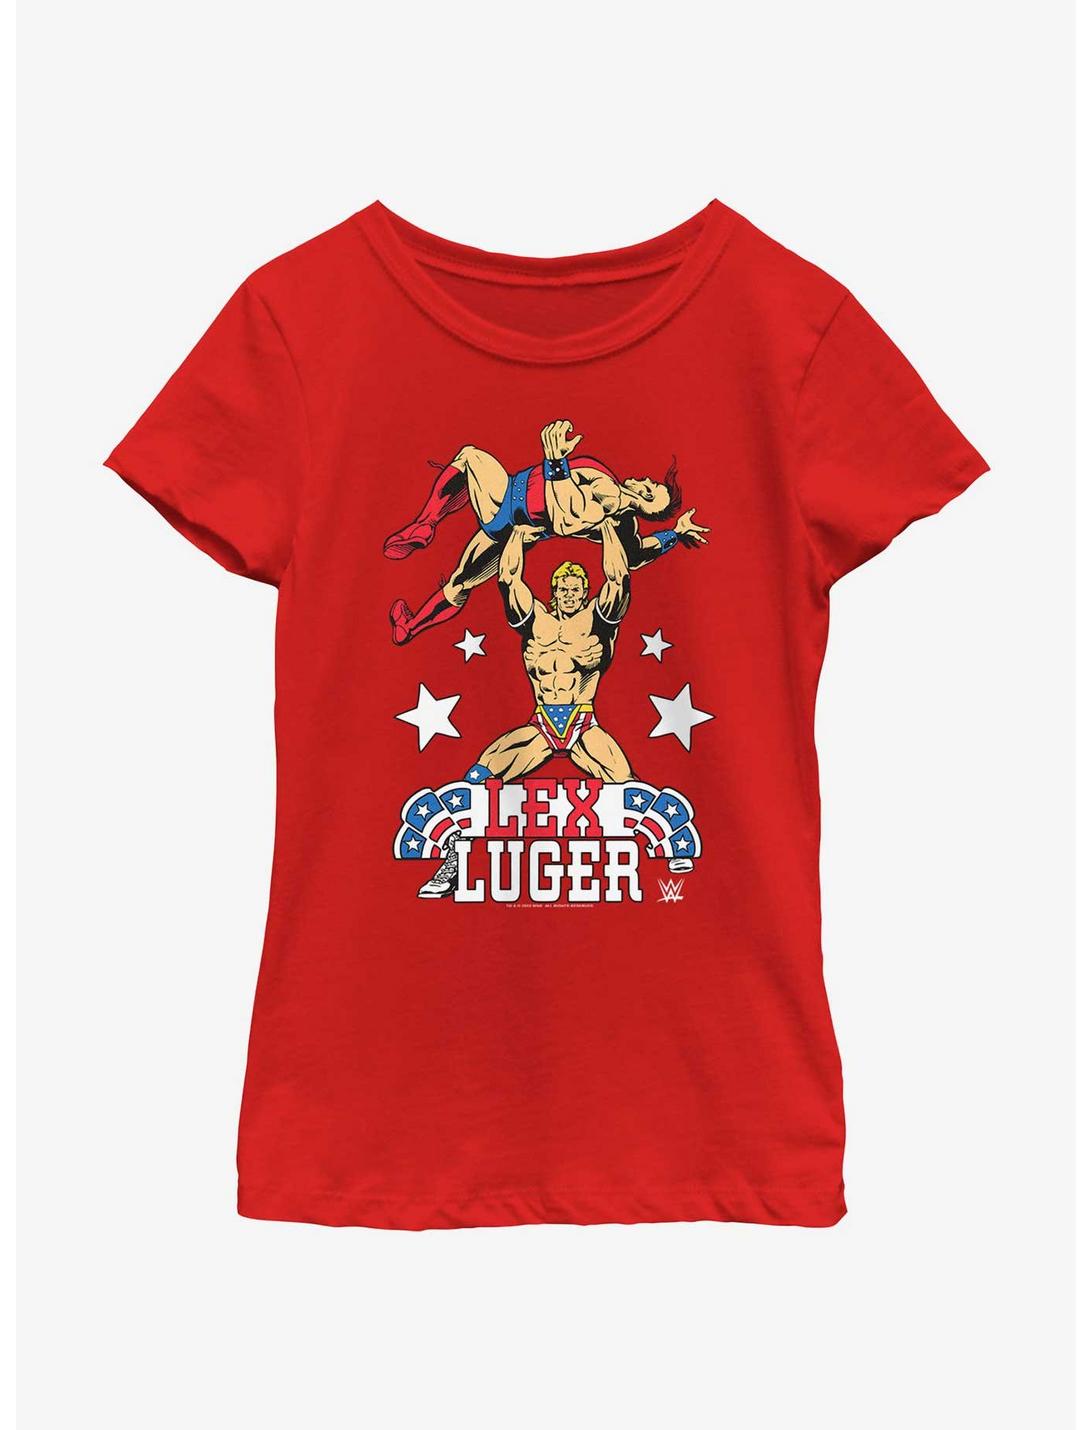 WWE Lex Luger Cartoon Style Youth Girls T-Shirt, RED, hi-res